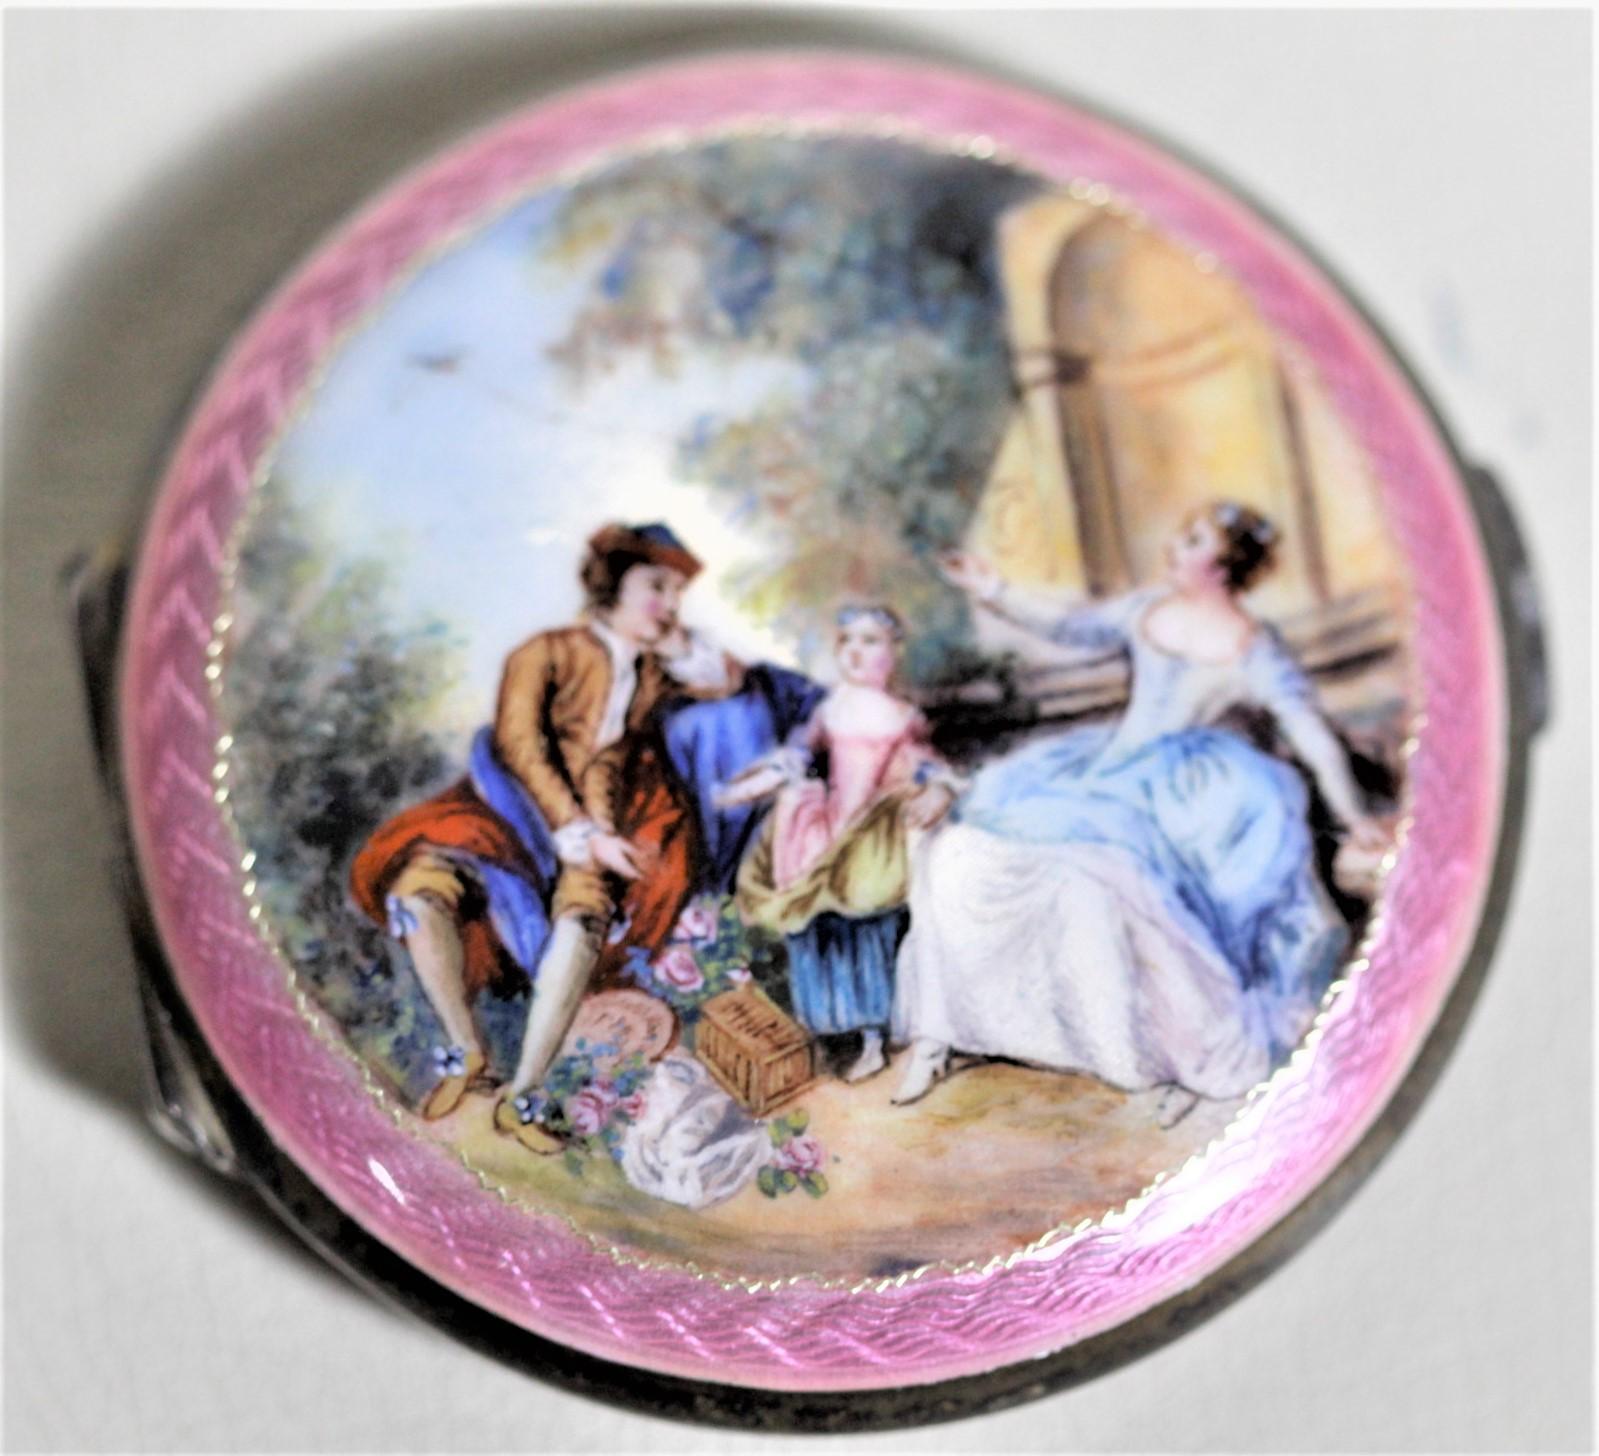 This sterling silver ladies compact was made for the Birks retailer in presumably France in circa 1950. This compact features an enamel portrait done in the French Renaissance Revival style which is bordered by a vibrant pink guilloche enamel